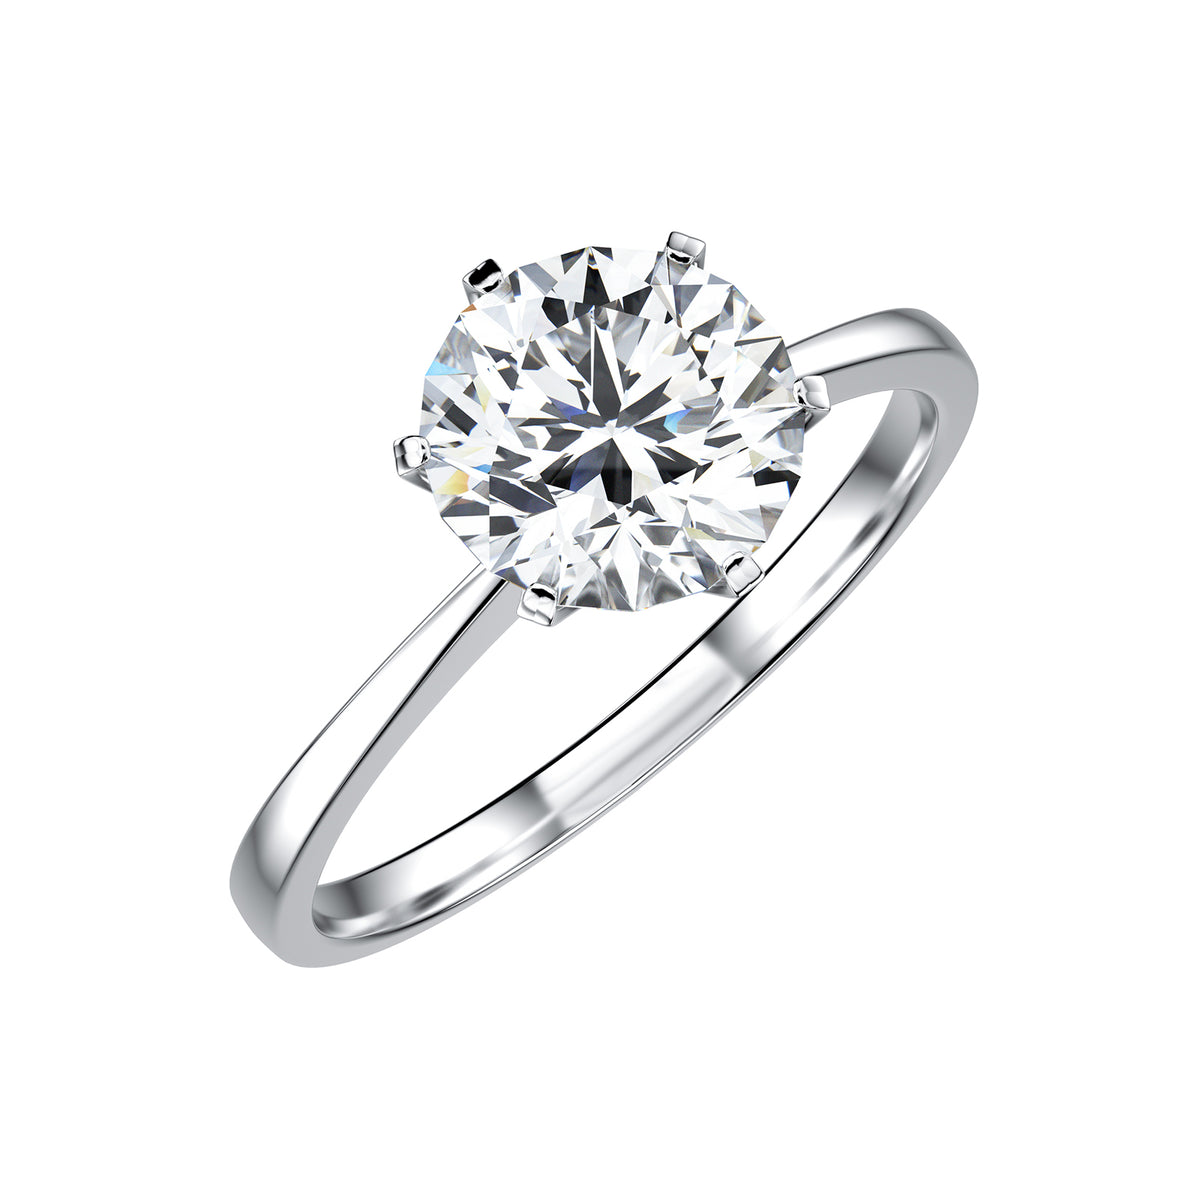 Vintage Bare 6 Prong Solitaire Moissanite Diamond Round Cut Ring